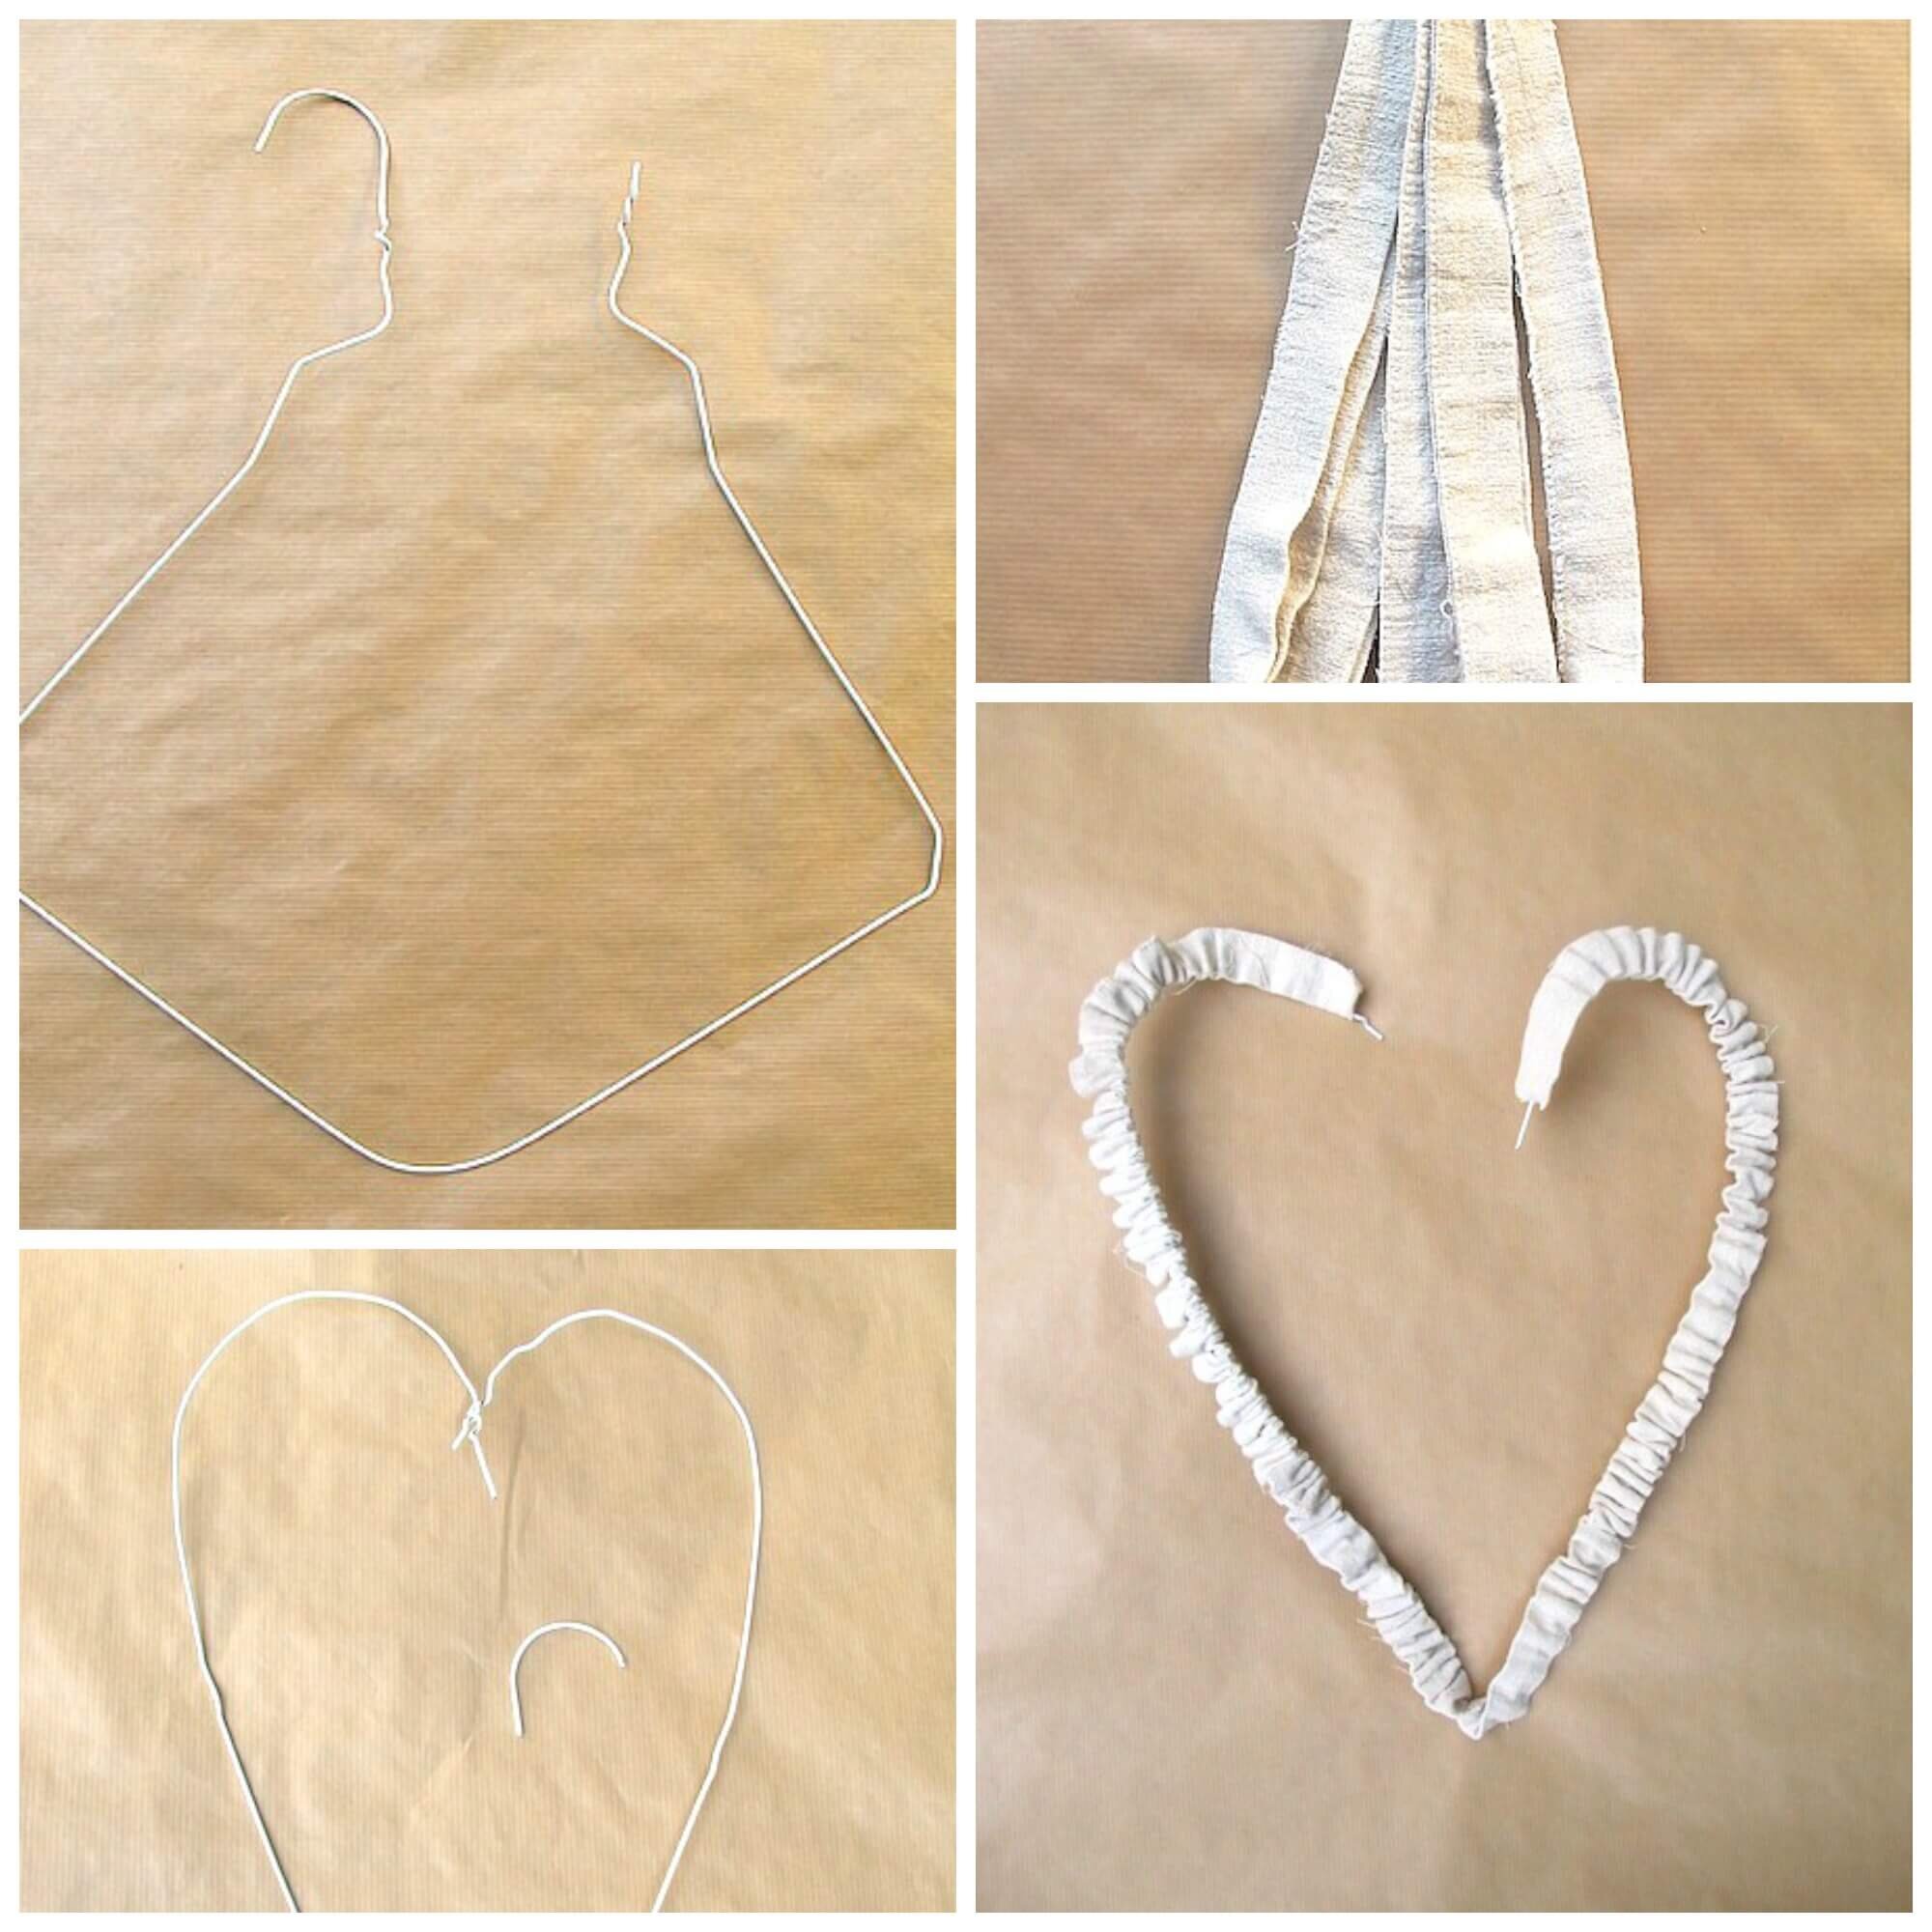 Steps to make a wire hanger heart http://mysoulfulhome.com